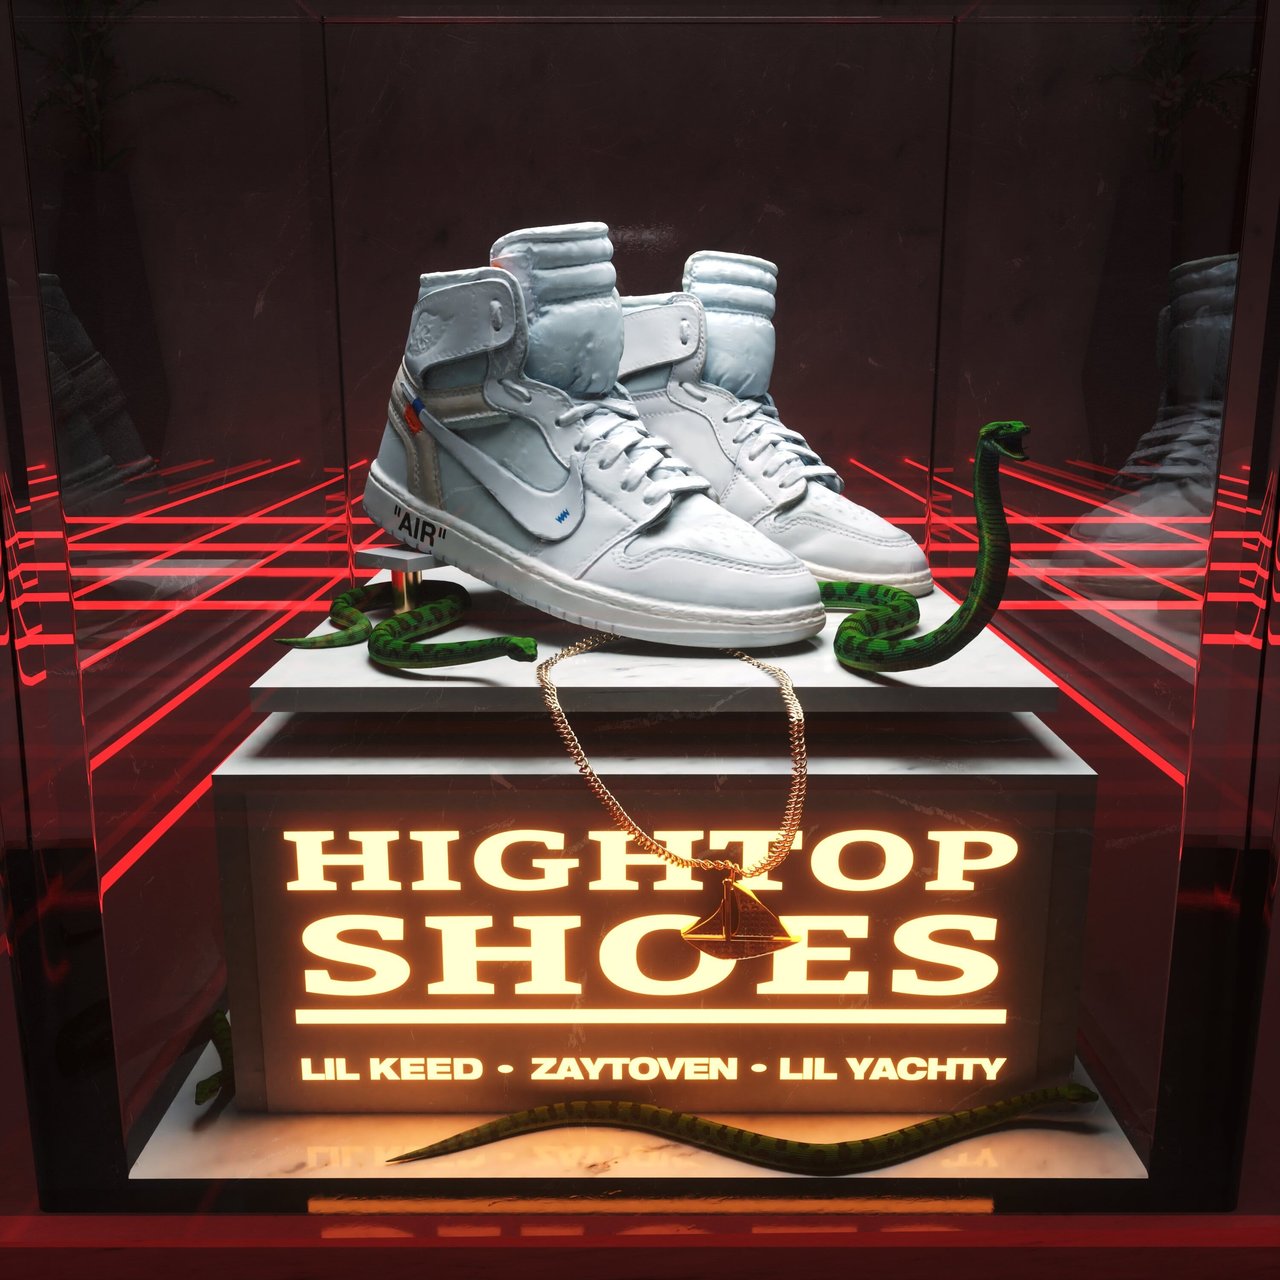 Lil Keed, Zaytoven and Lil Yachty - Hightop Shoes (Cover)